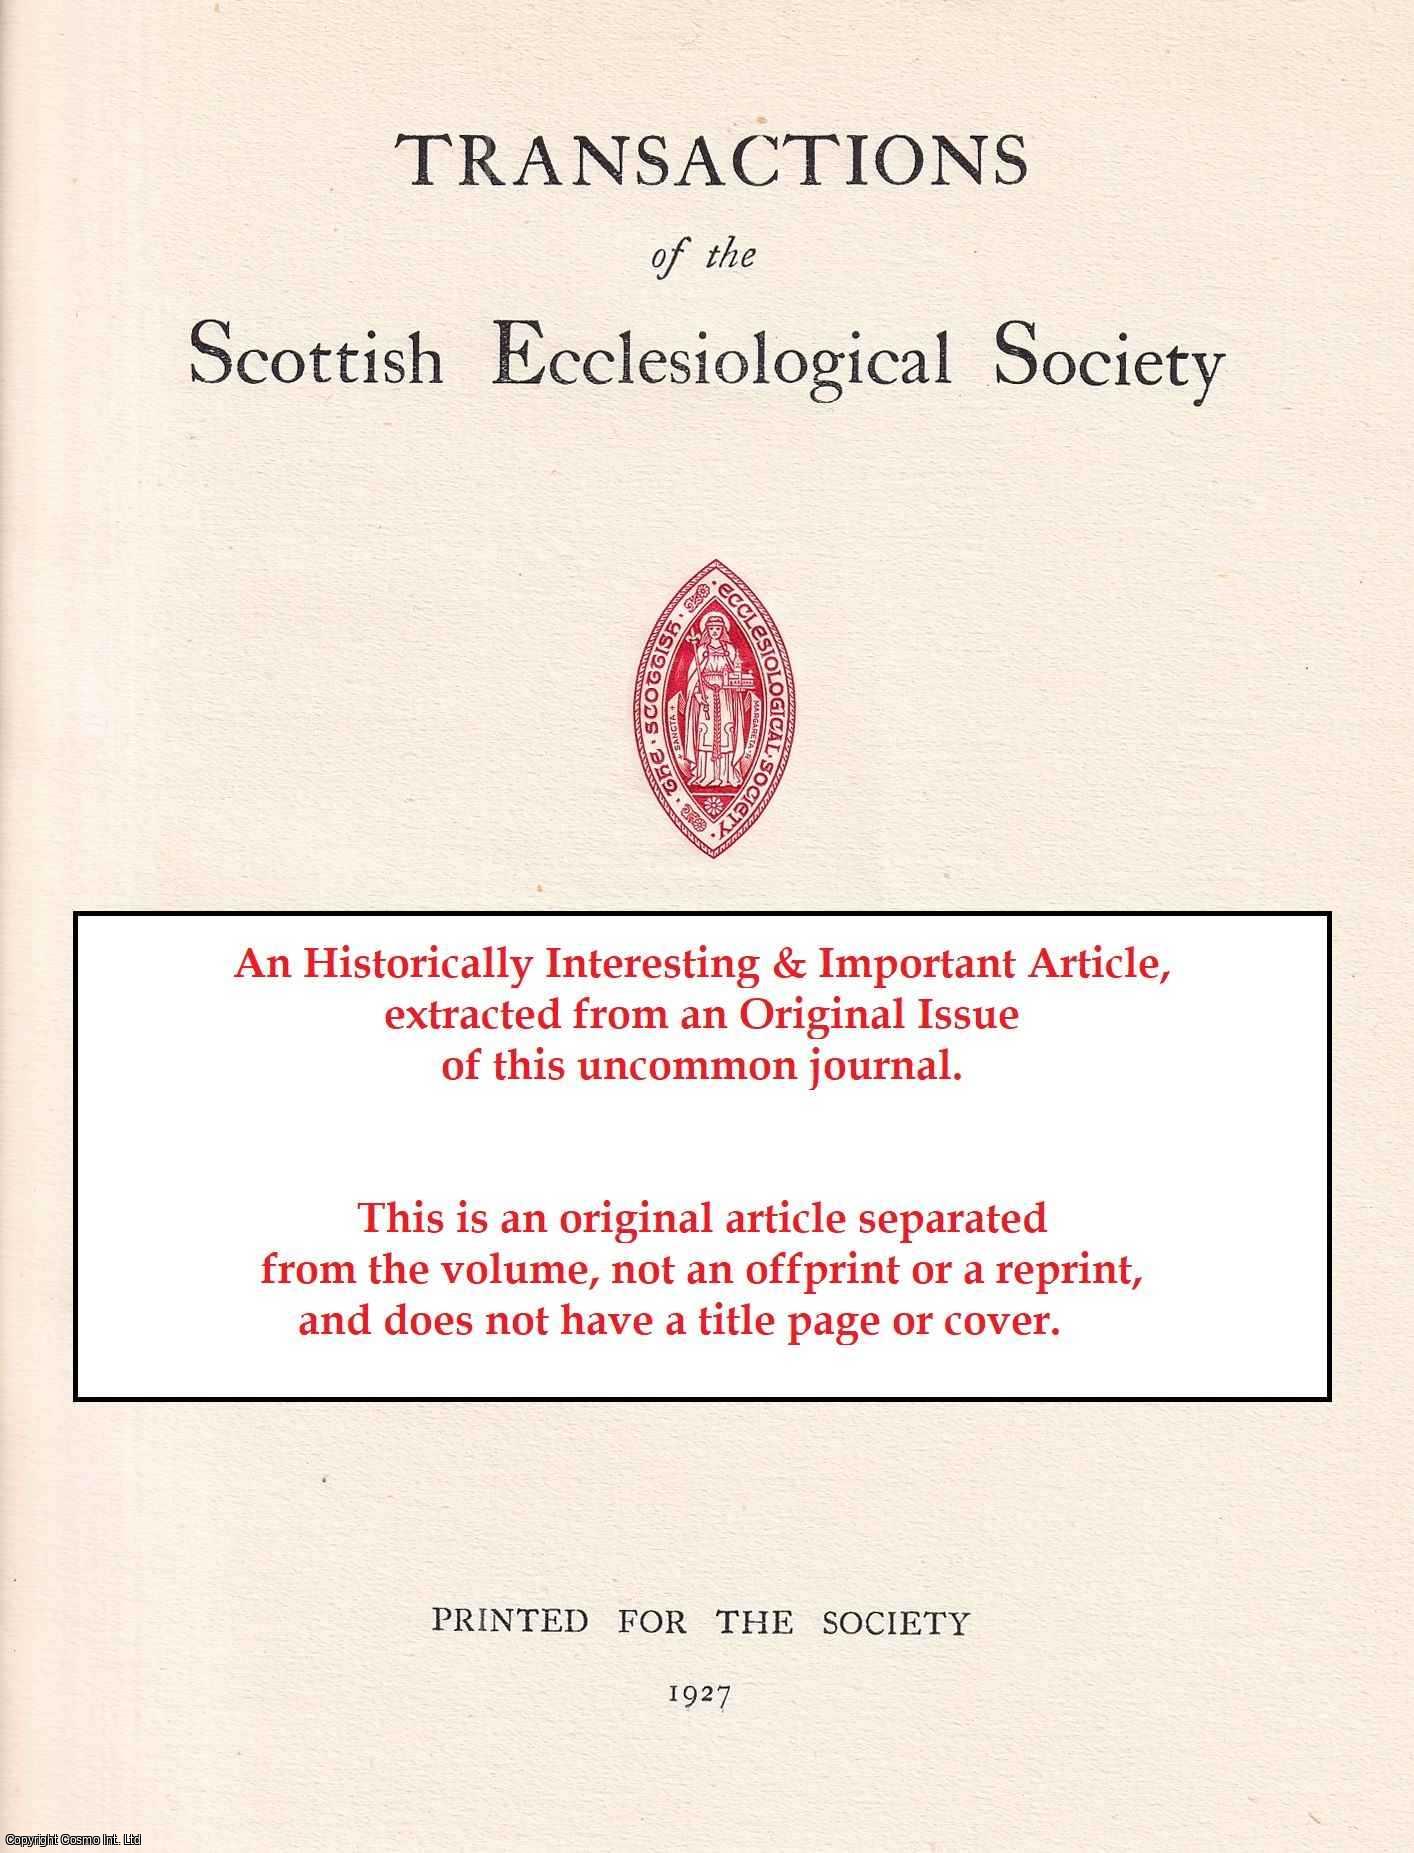 James Turreff - The Aberdeen Non Jurors. An original article from the Transactions of the Aberdeen Ecclesiological Society, 1897.